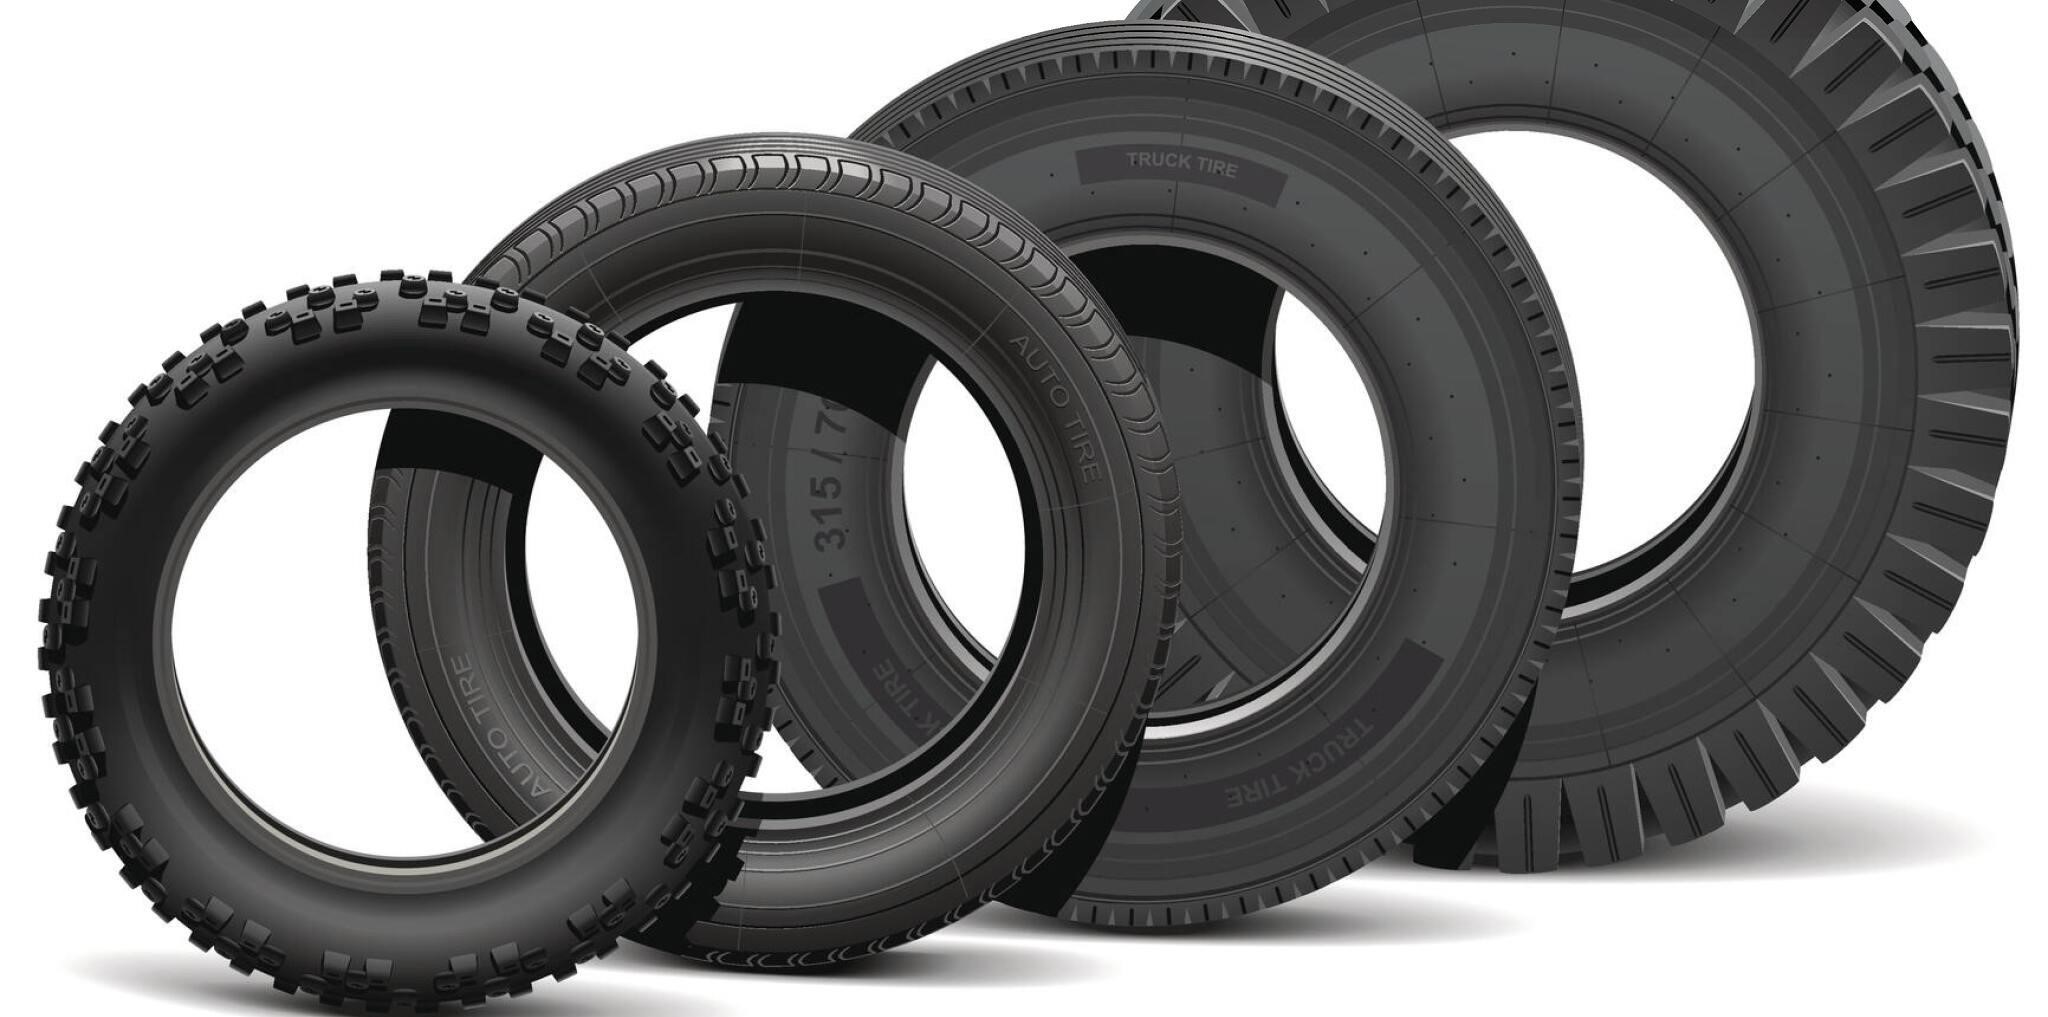 Diversity of Different Tire Sizes